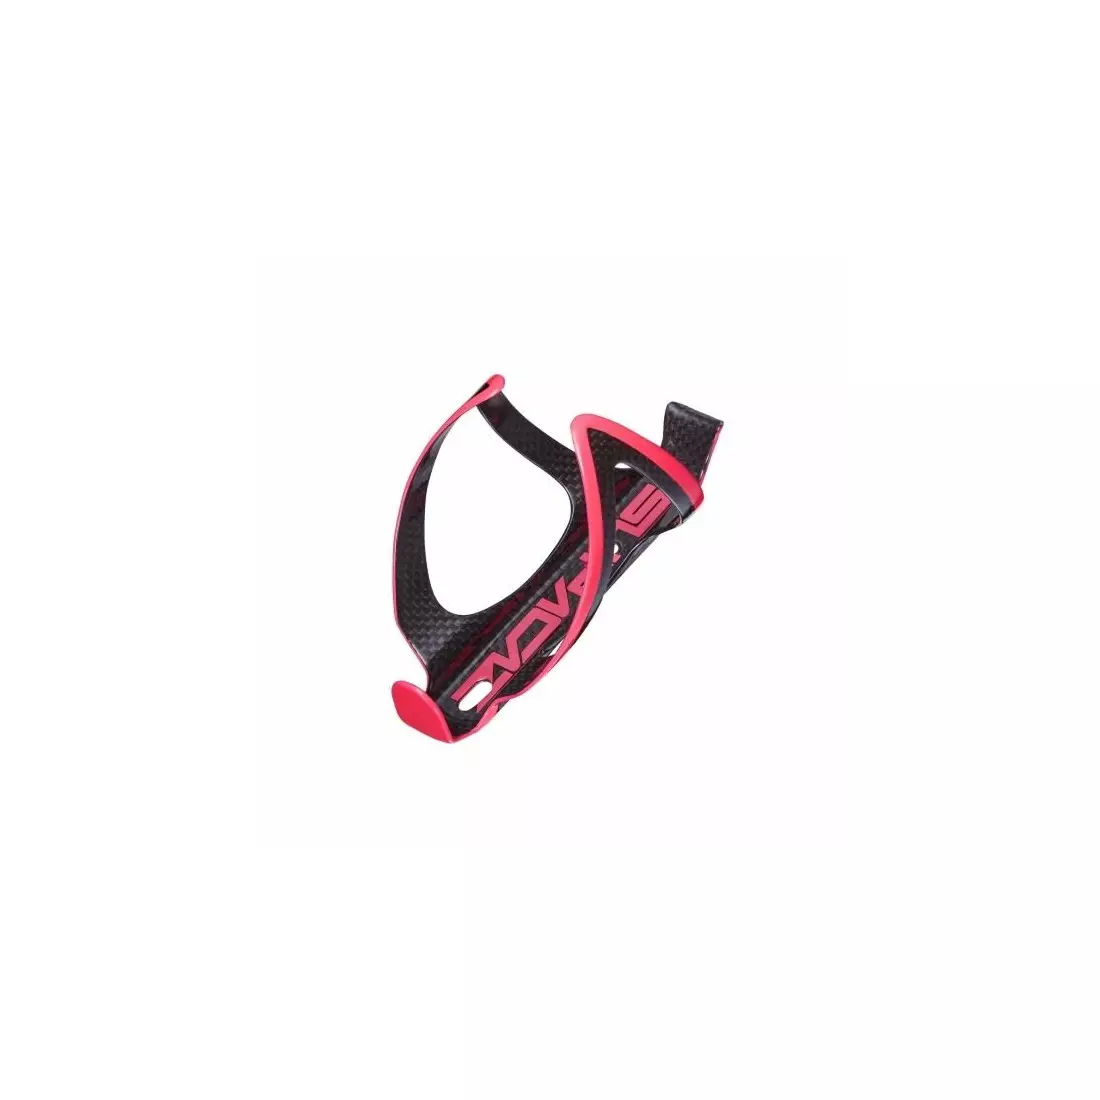 SUPACAZ bicycle water bottle cage FLY CARBON black/pink CG-06